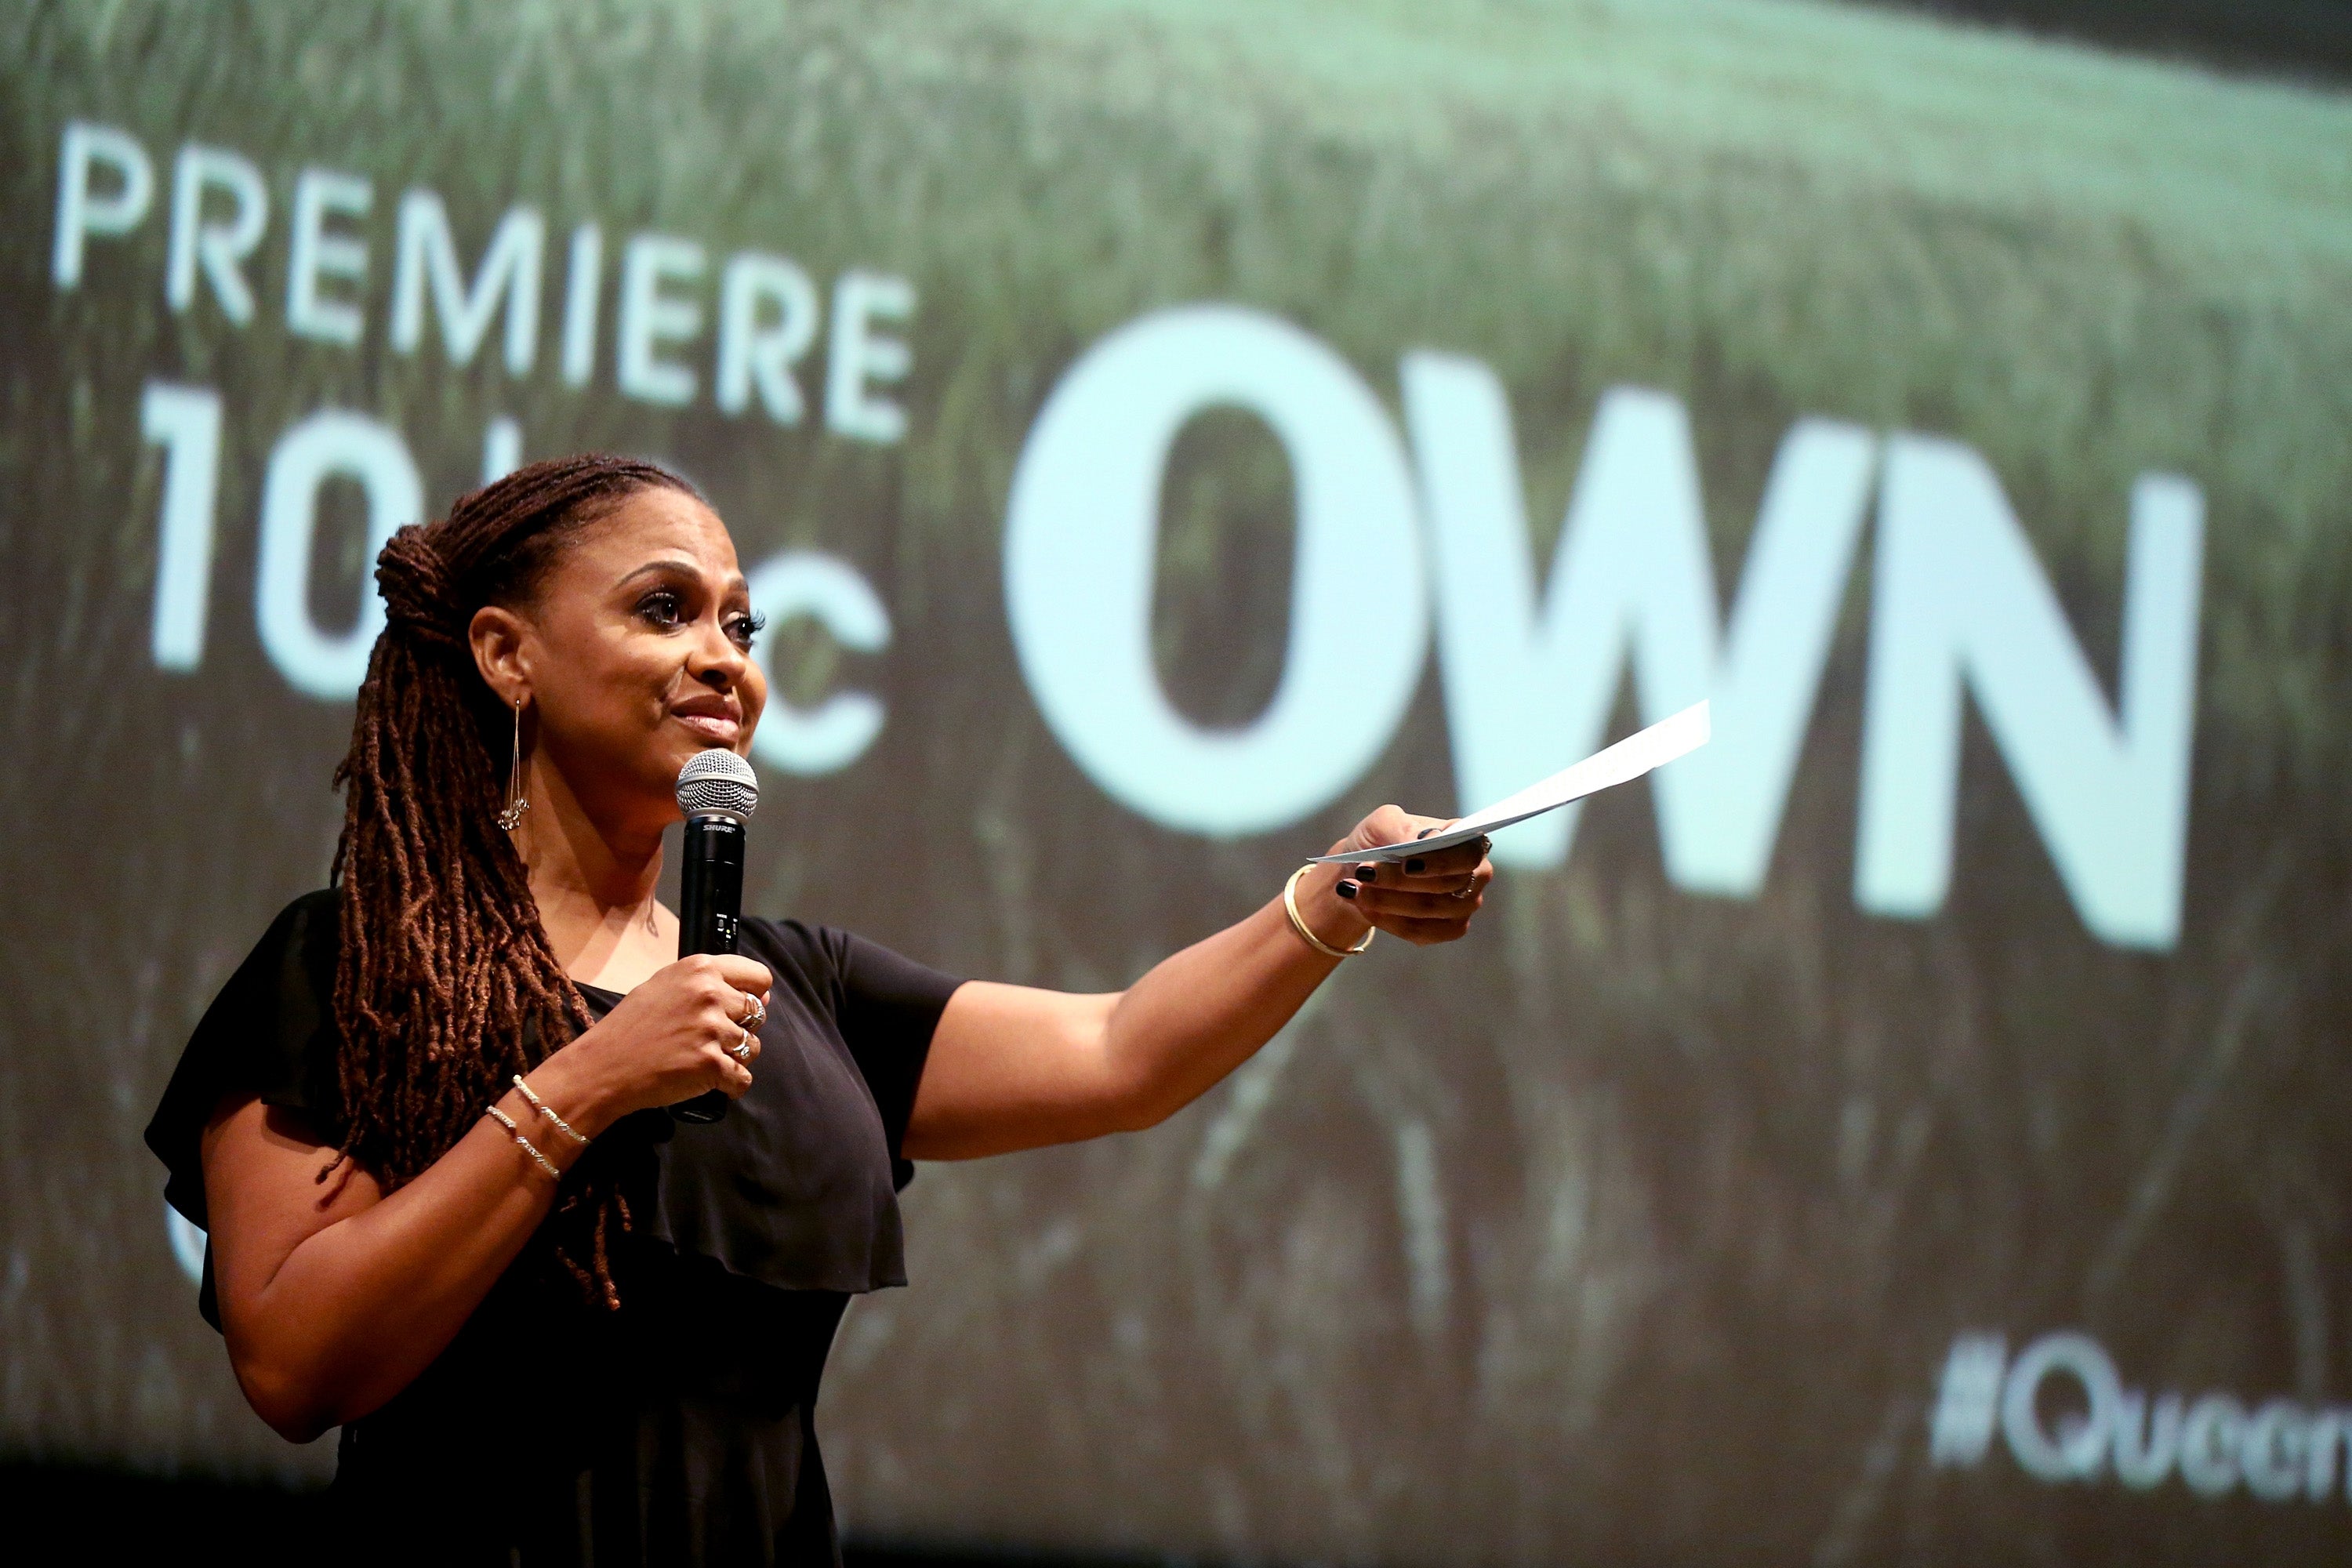 Oprah Winfrey and Ava DuVernay Shine at  OWN's “Queen Sugar” Premiere
